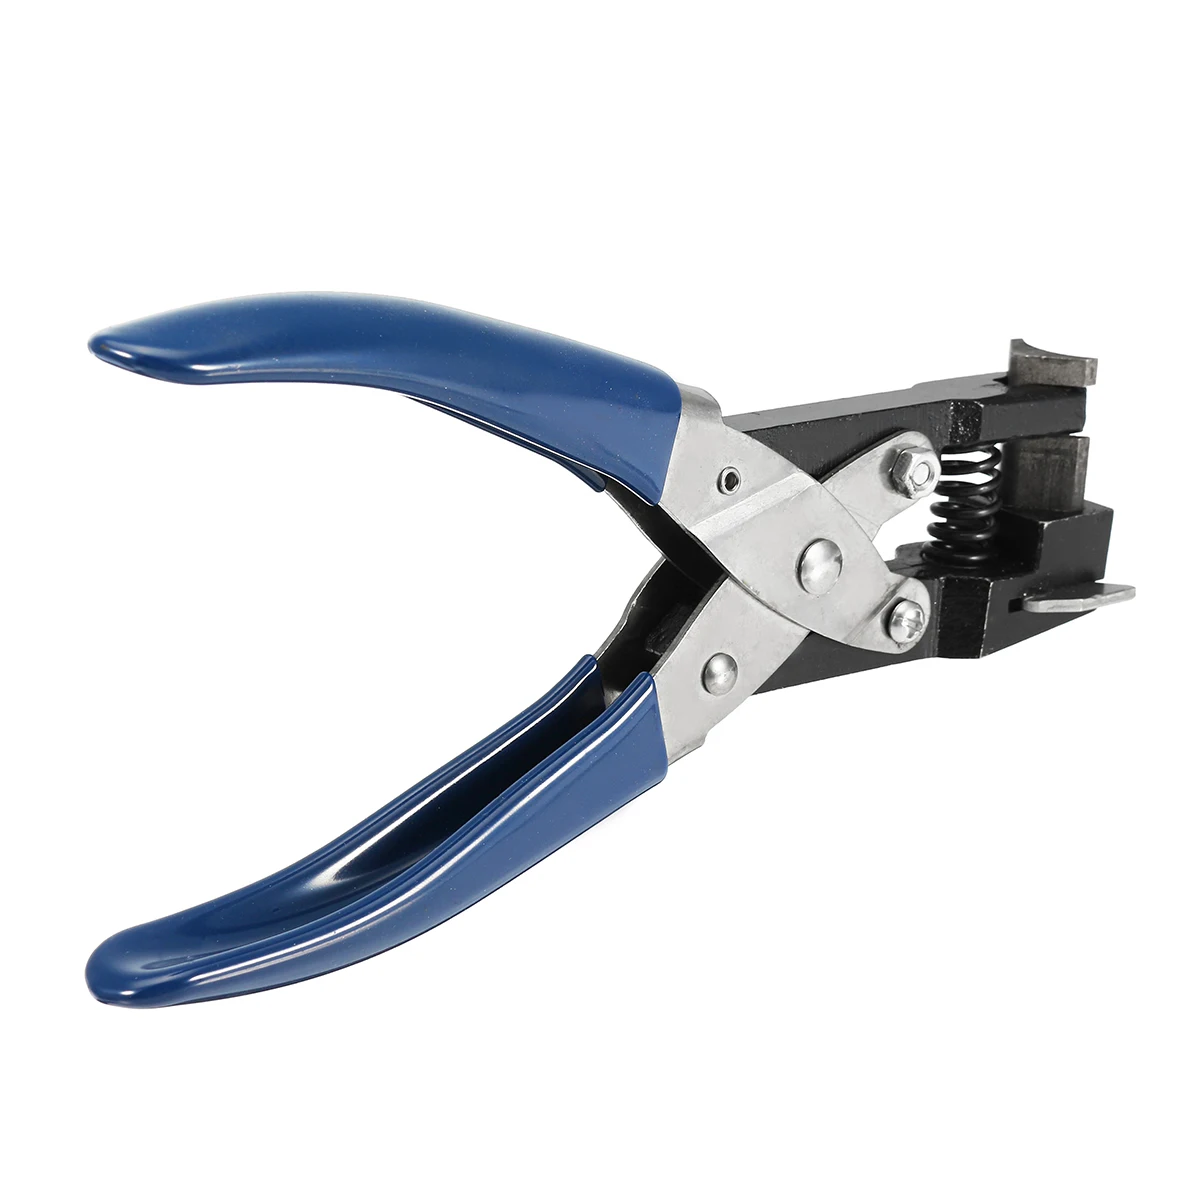 Where To Buy 10mm Radius Round Corner Cutter Punch Rounder Online Steel  Hand Held C-006 PVC Cards Pliers